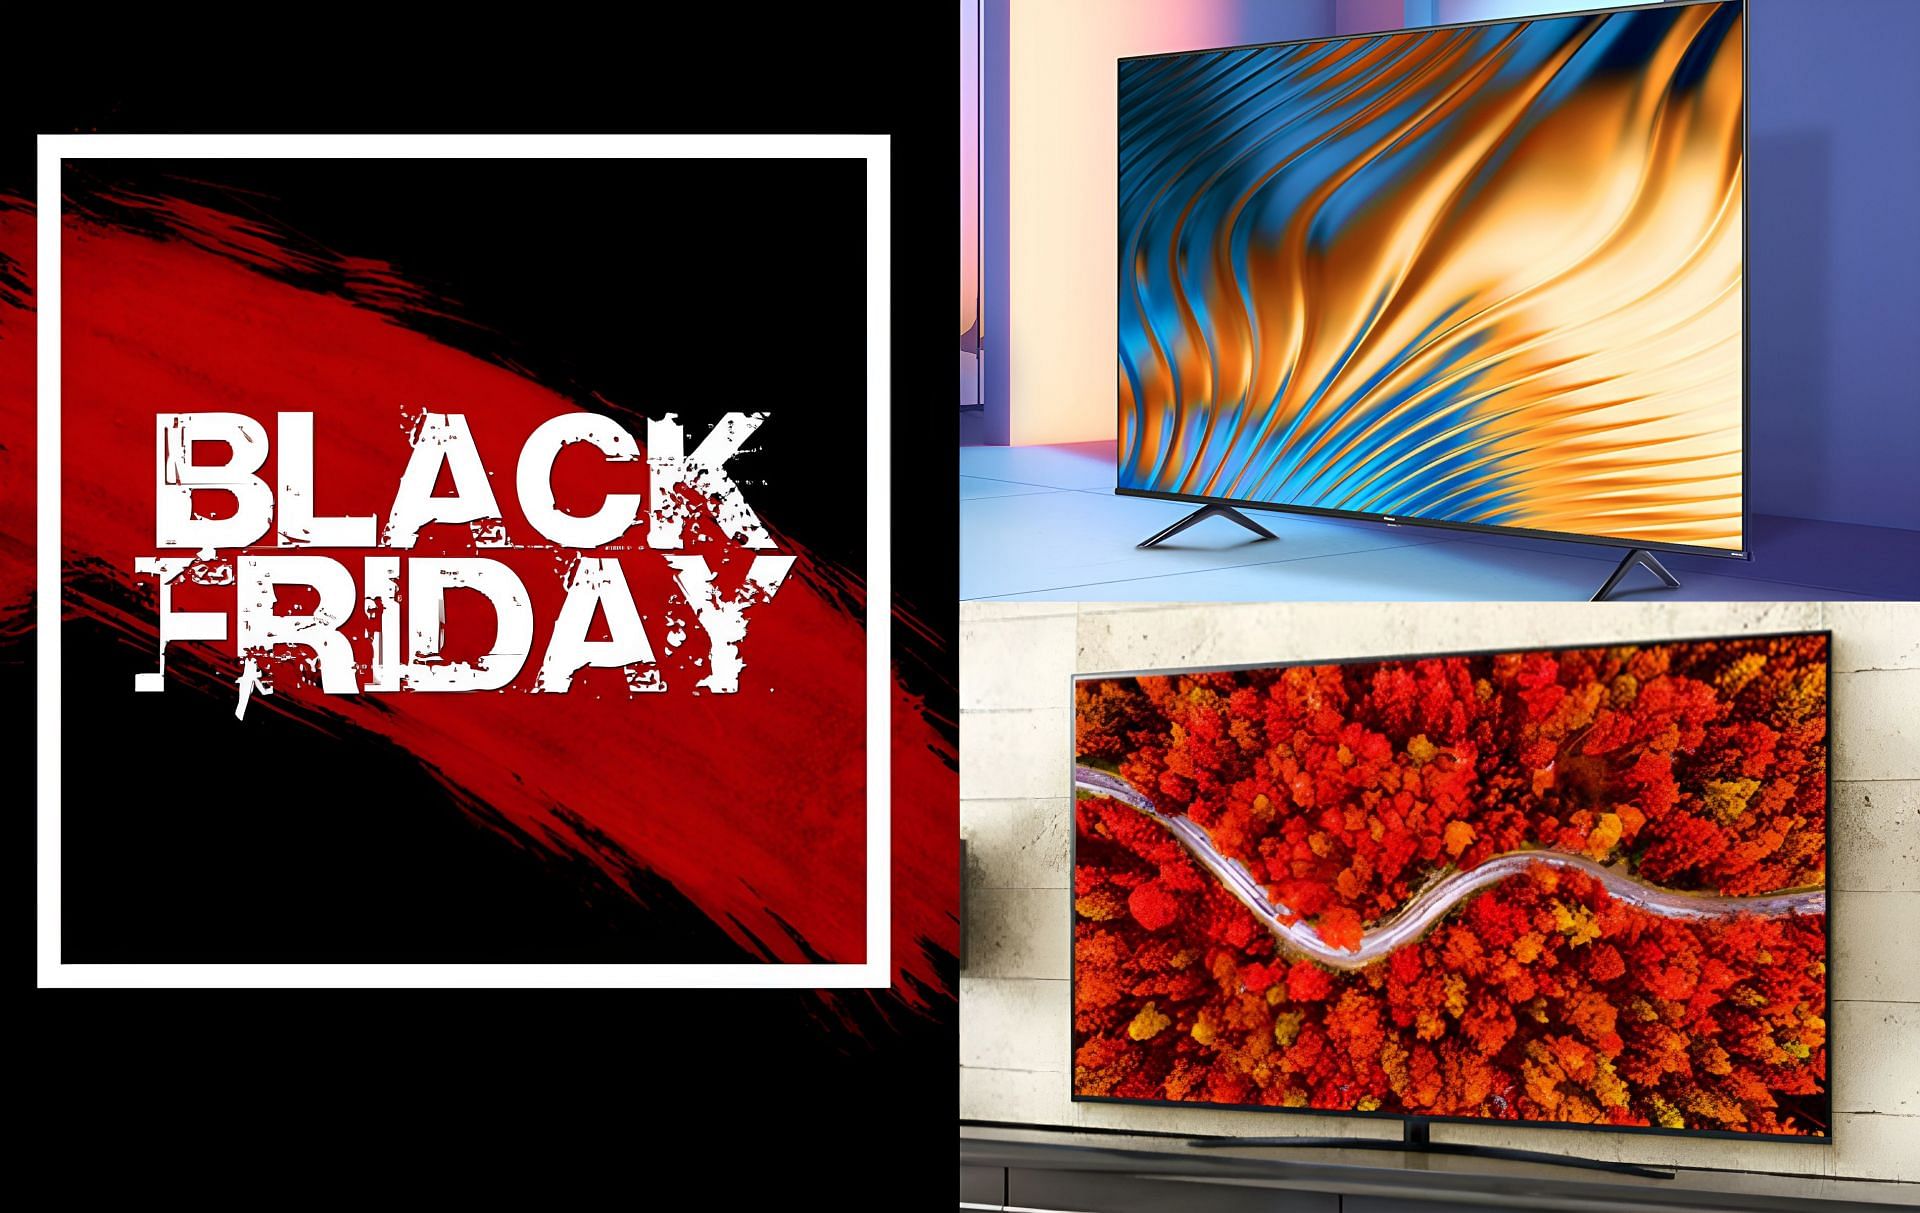 Black Friday Deals on 4k Smart TVs (Image by Samsung and HiSense)